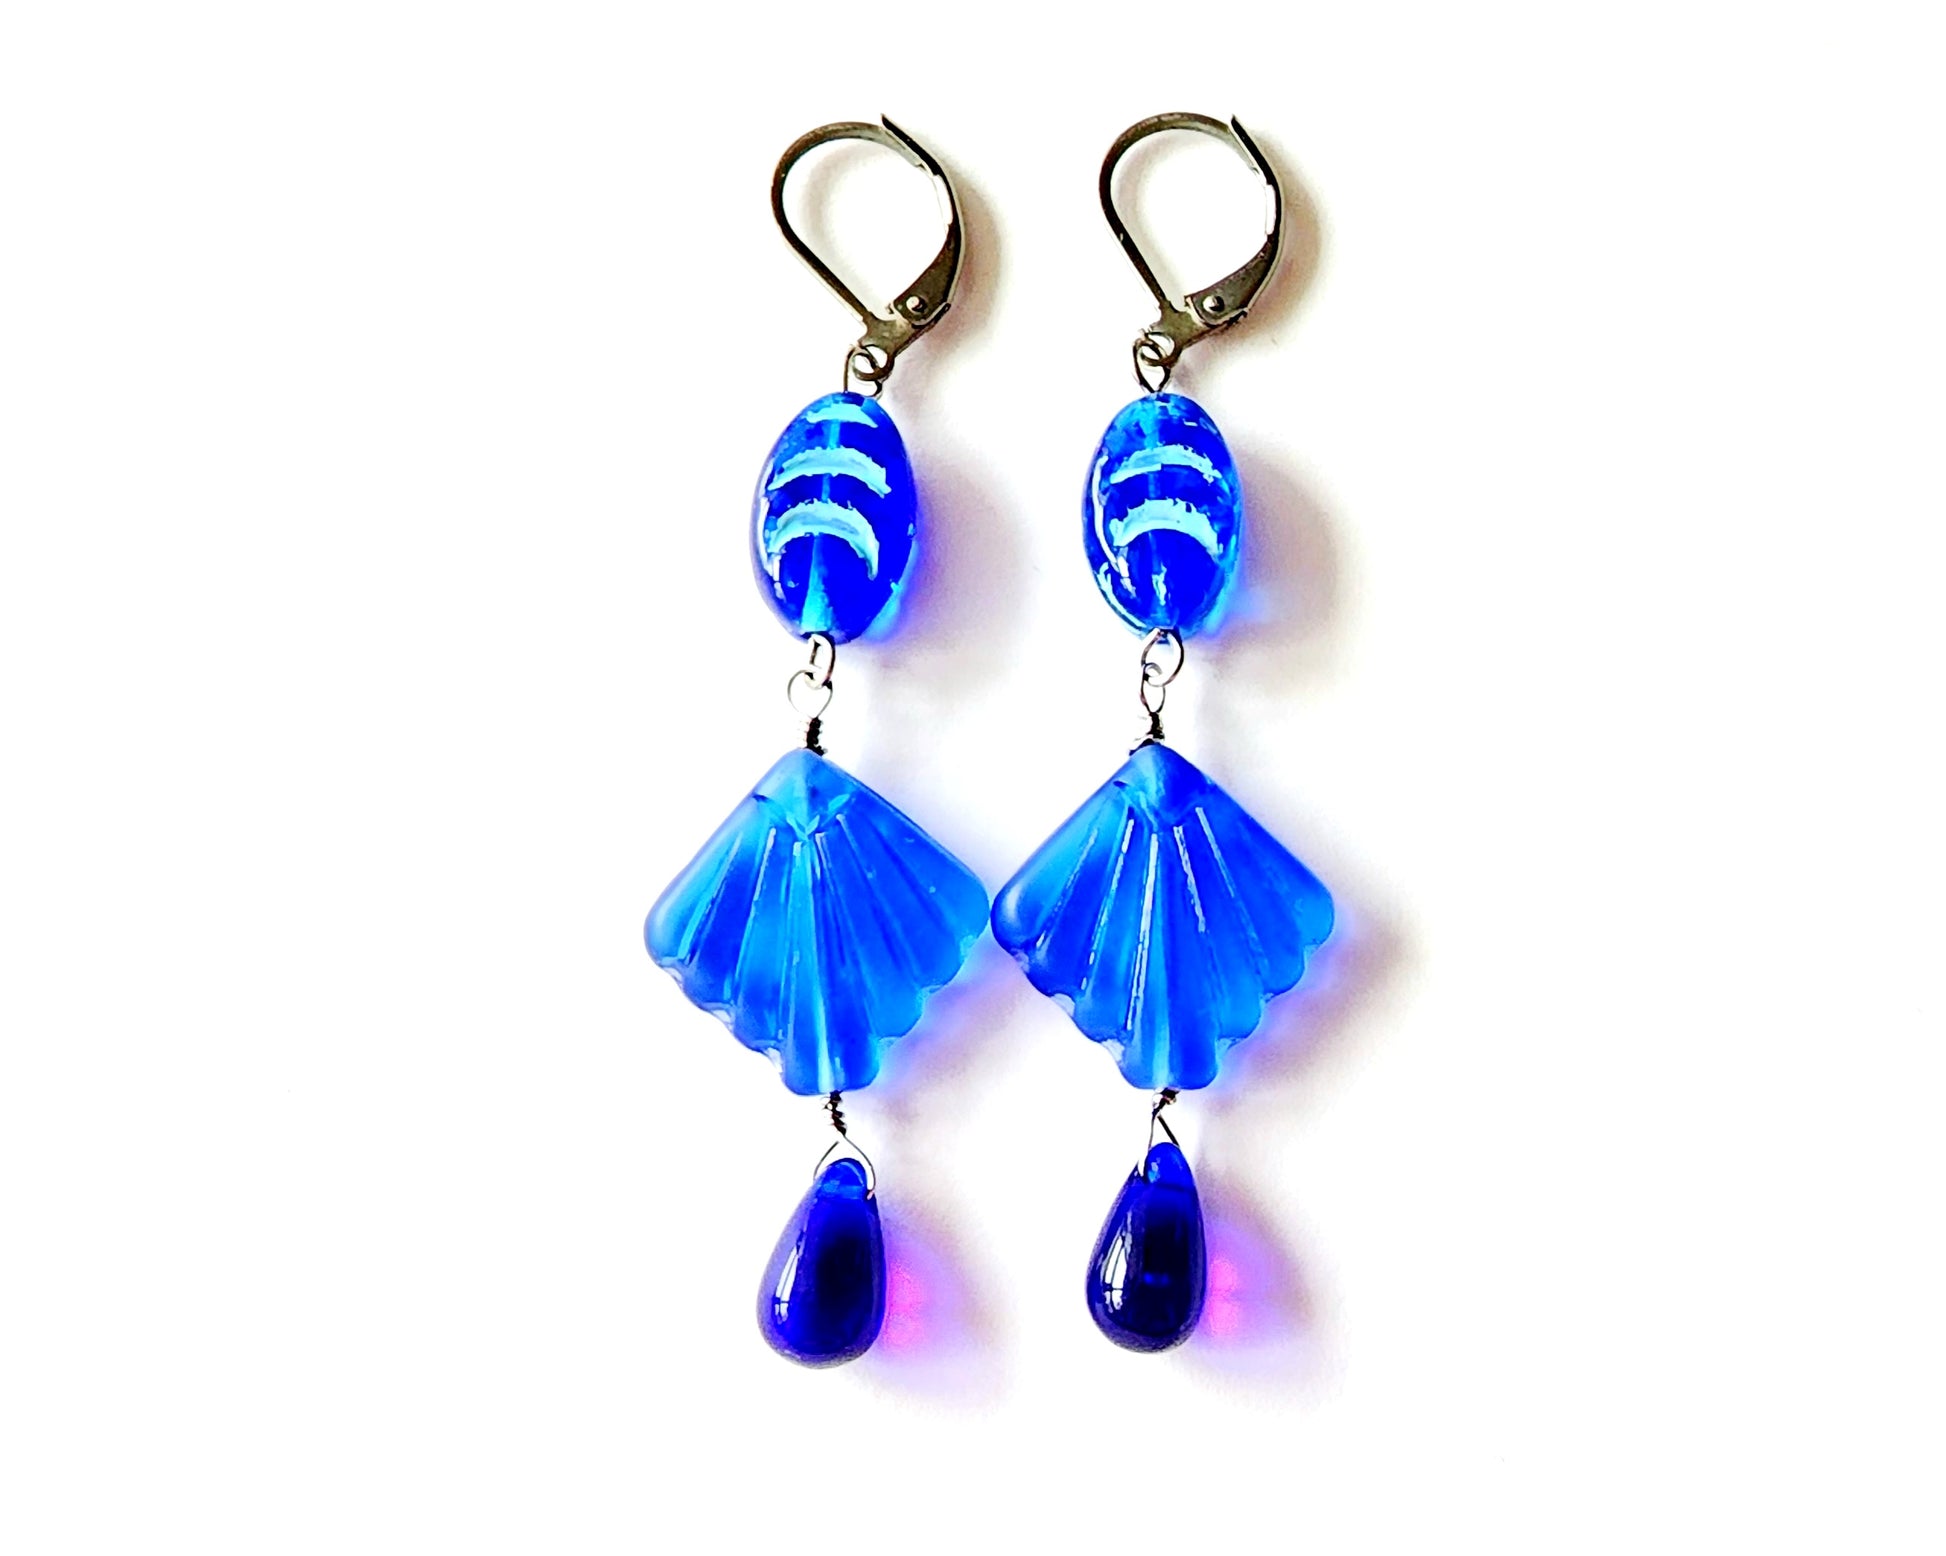 Extra Long Blue Shell Ocean Theme Earrings with sapphire blue color glass shell, wave design bead and drop shape beads on the ends. The metals is a silver color Stainless Steel.